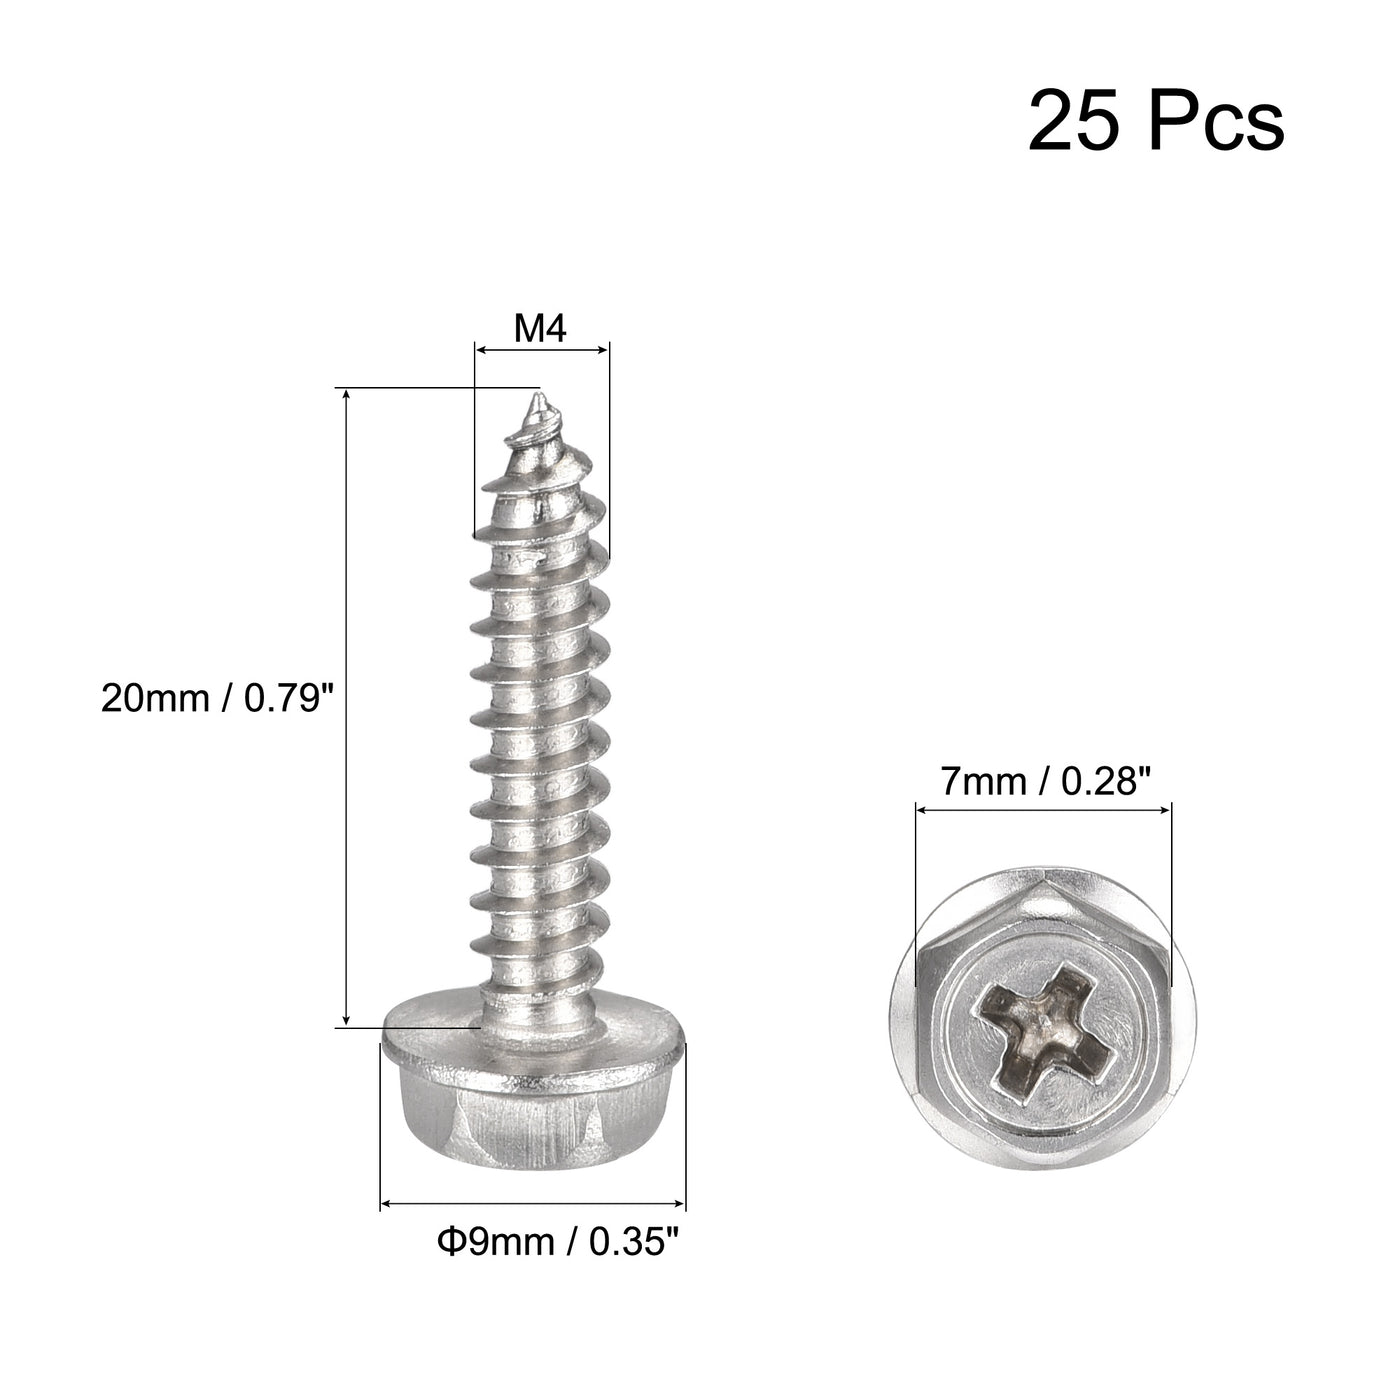 uxcell Uxcell Phillips Hex Washer Self Tapping Screws, M4 x 20mm 304 Stainless Steel Hex Flange Sheet Metal Screw 25pcs